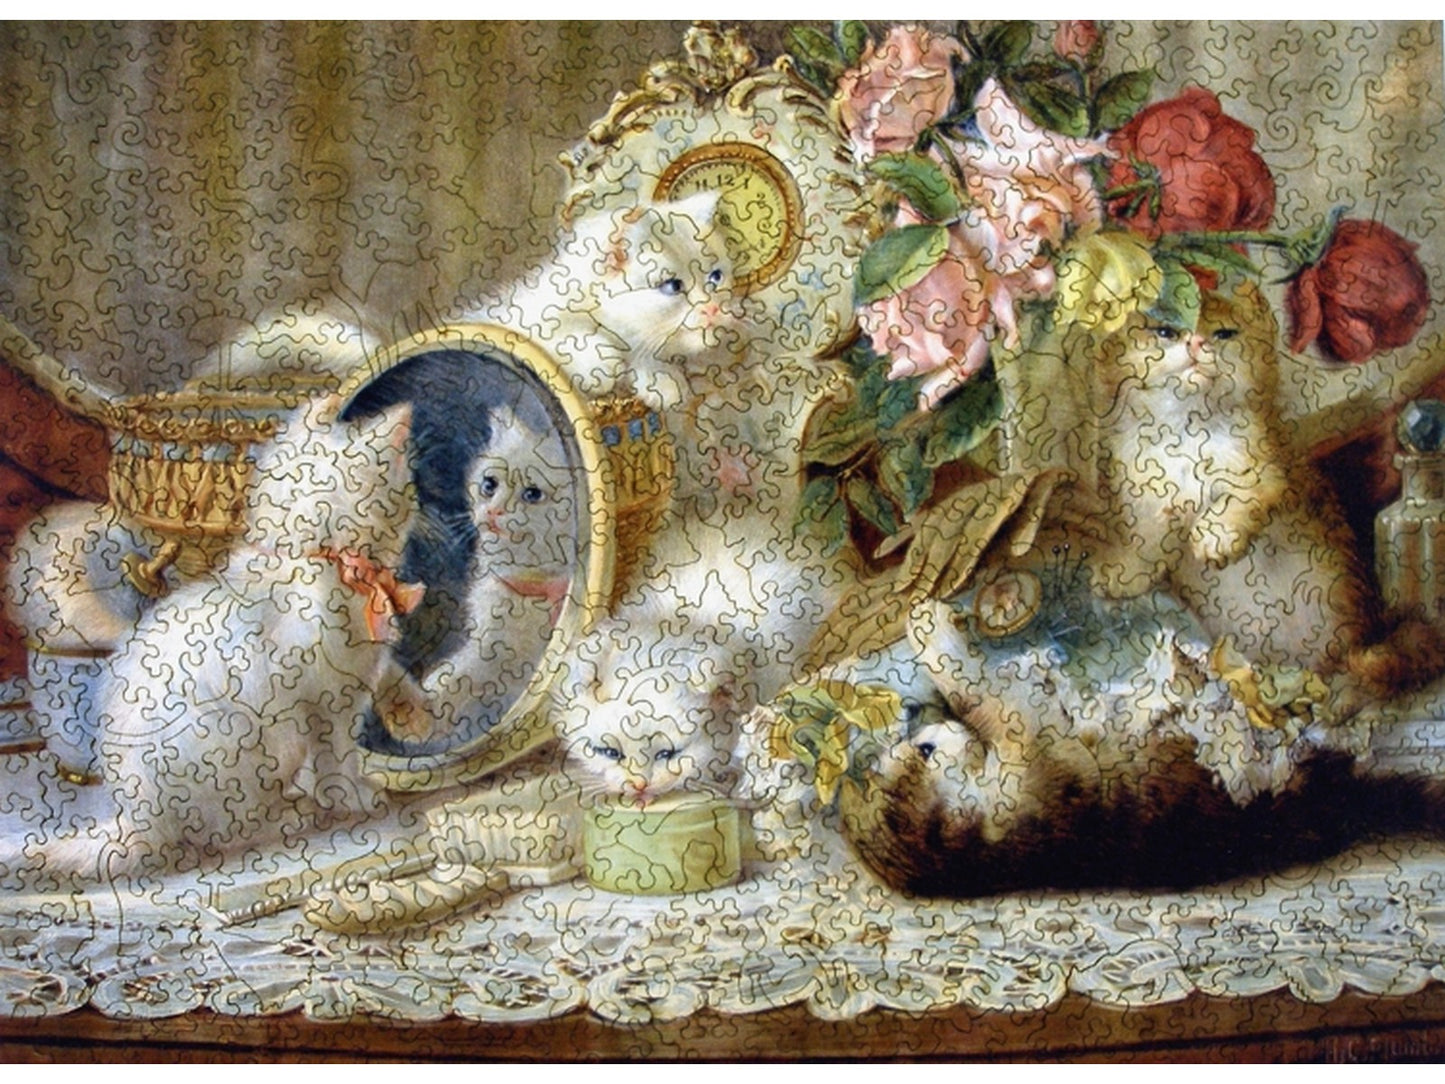 The front of the puzzle, The Five Senses, which shows five kittens playing.